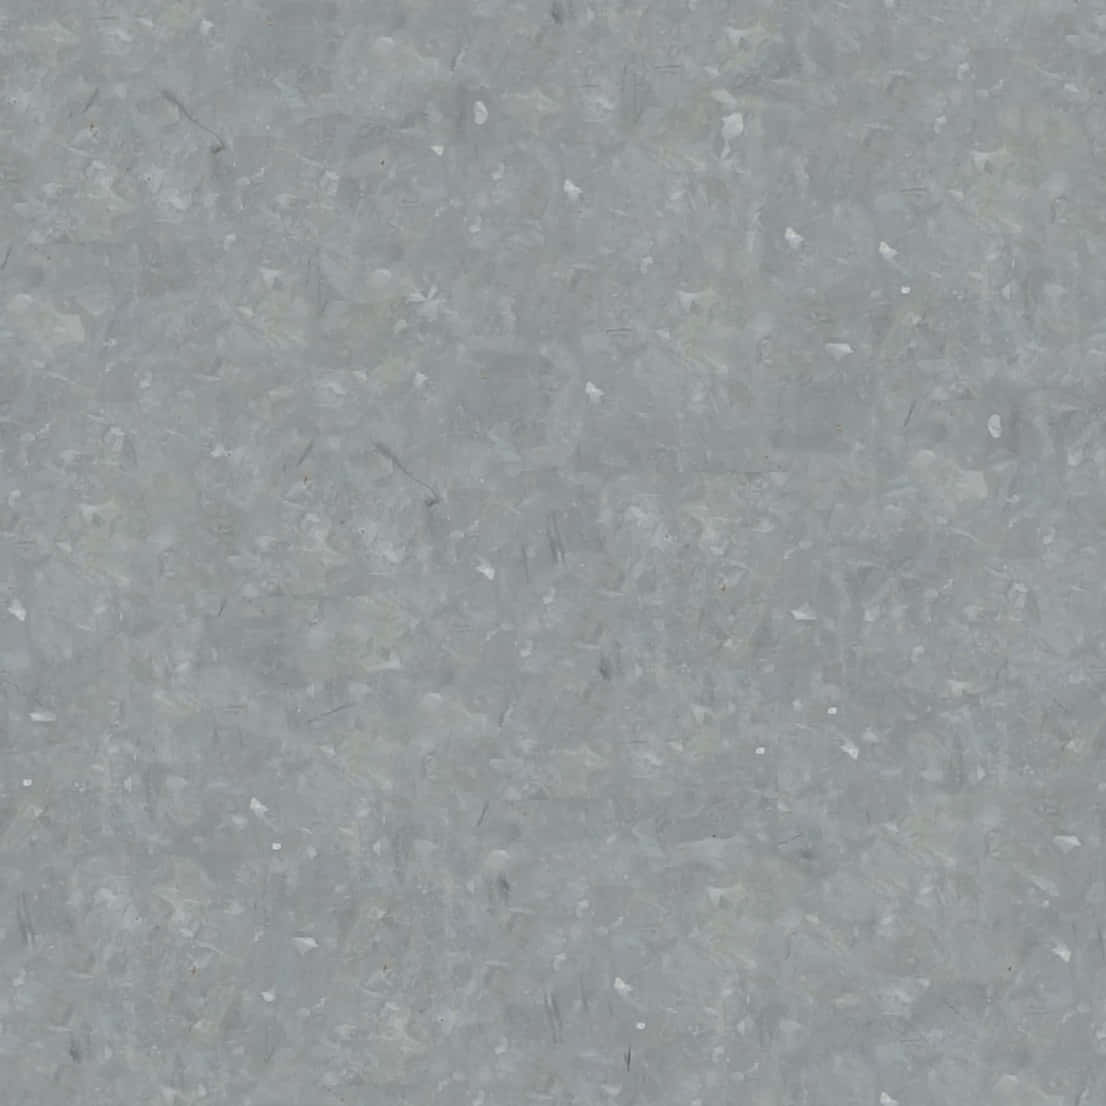 A Gray Background With A Few Small Stones